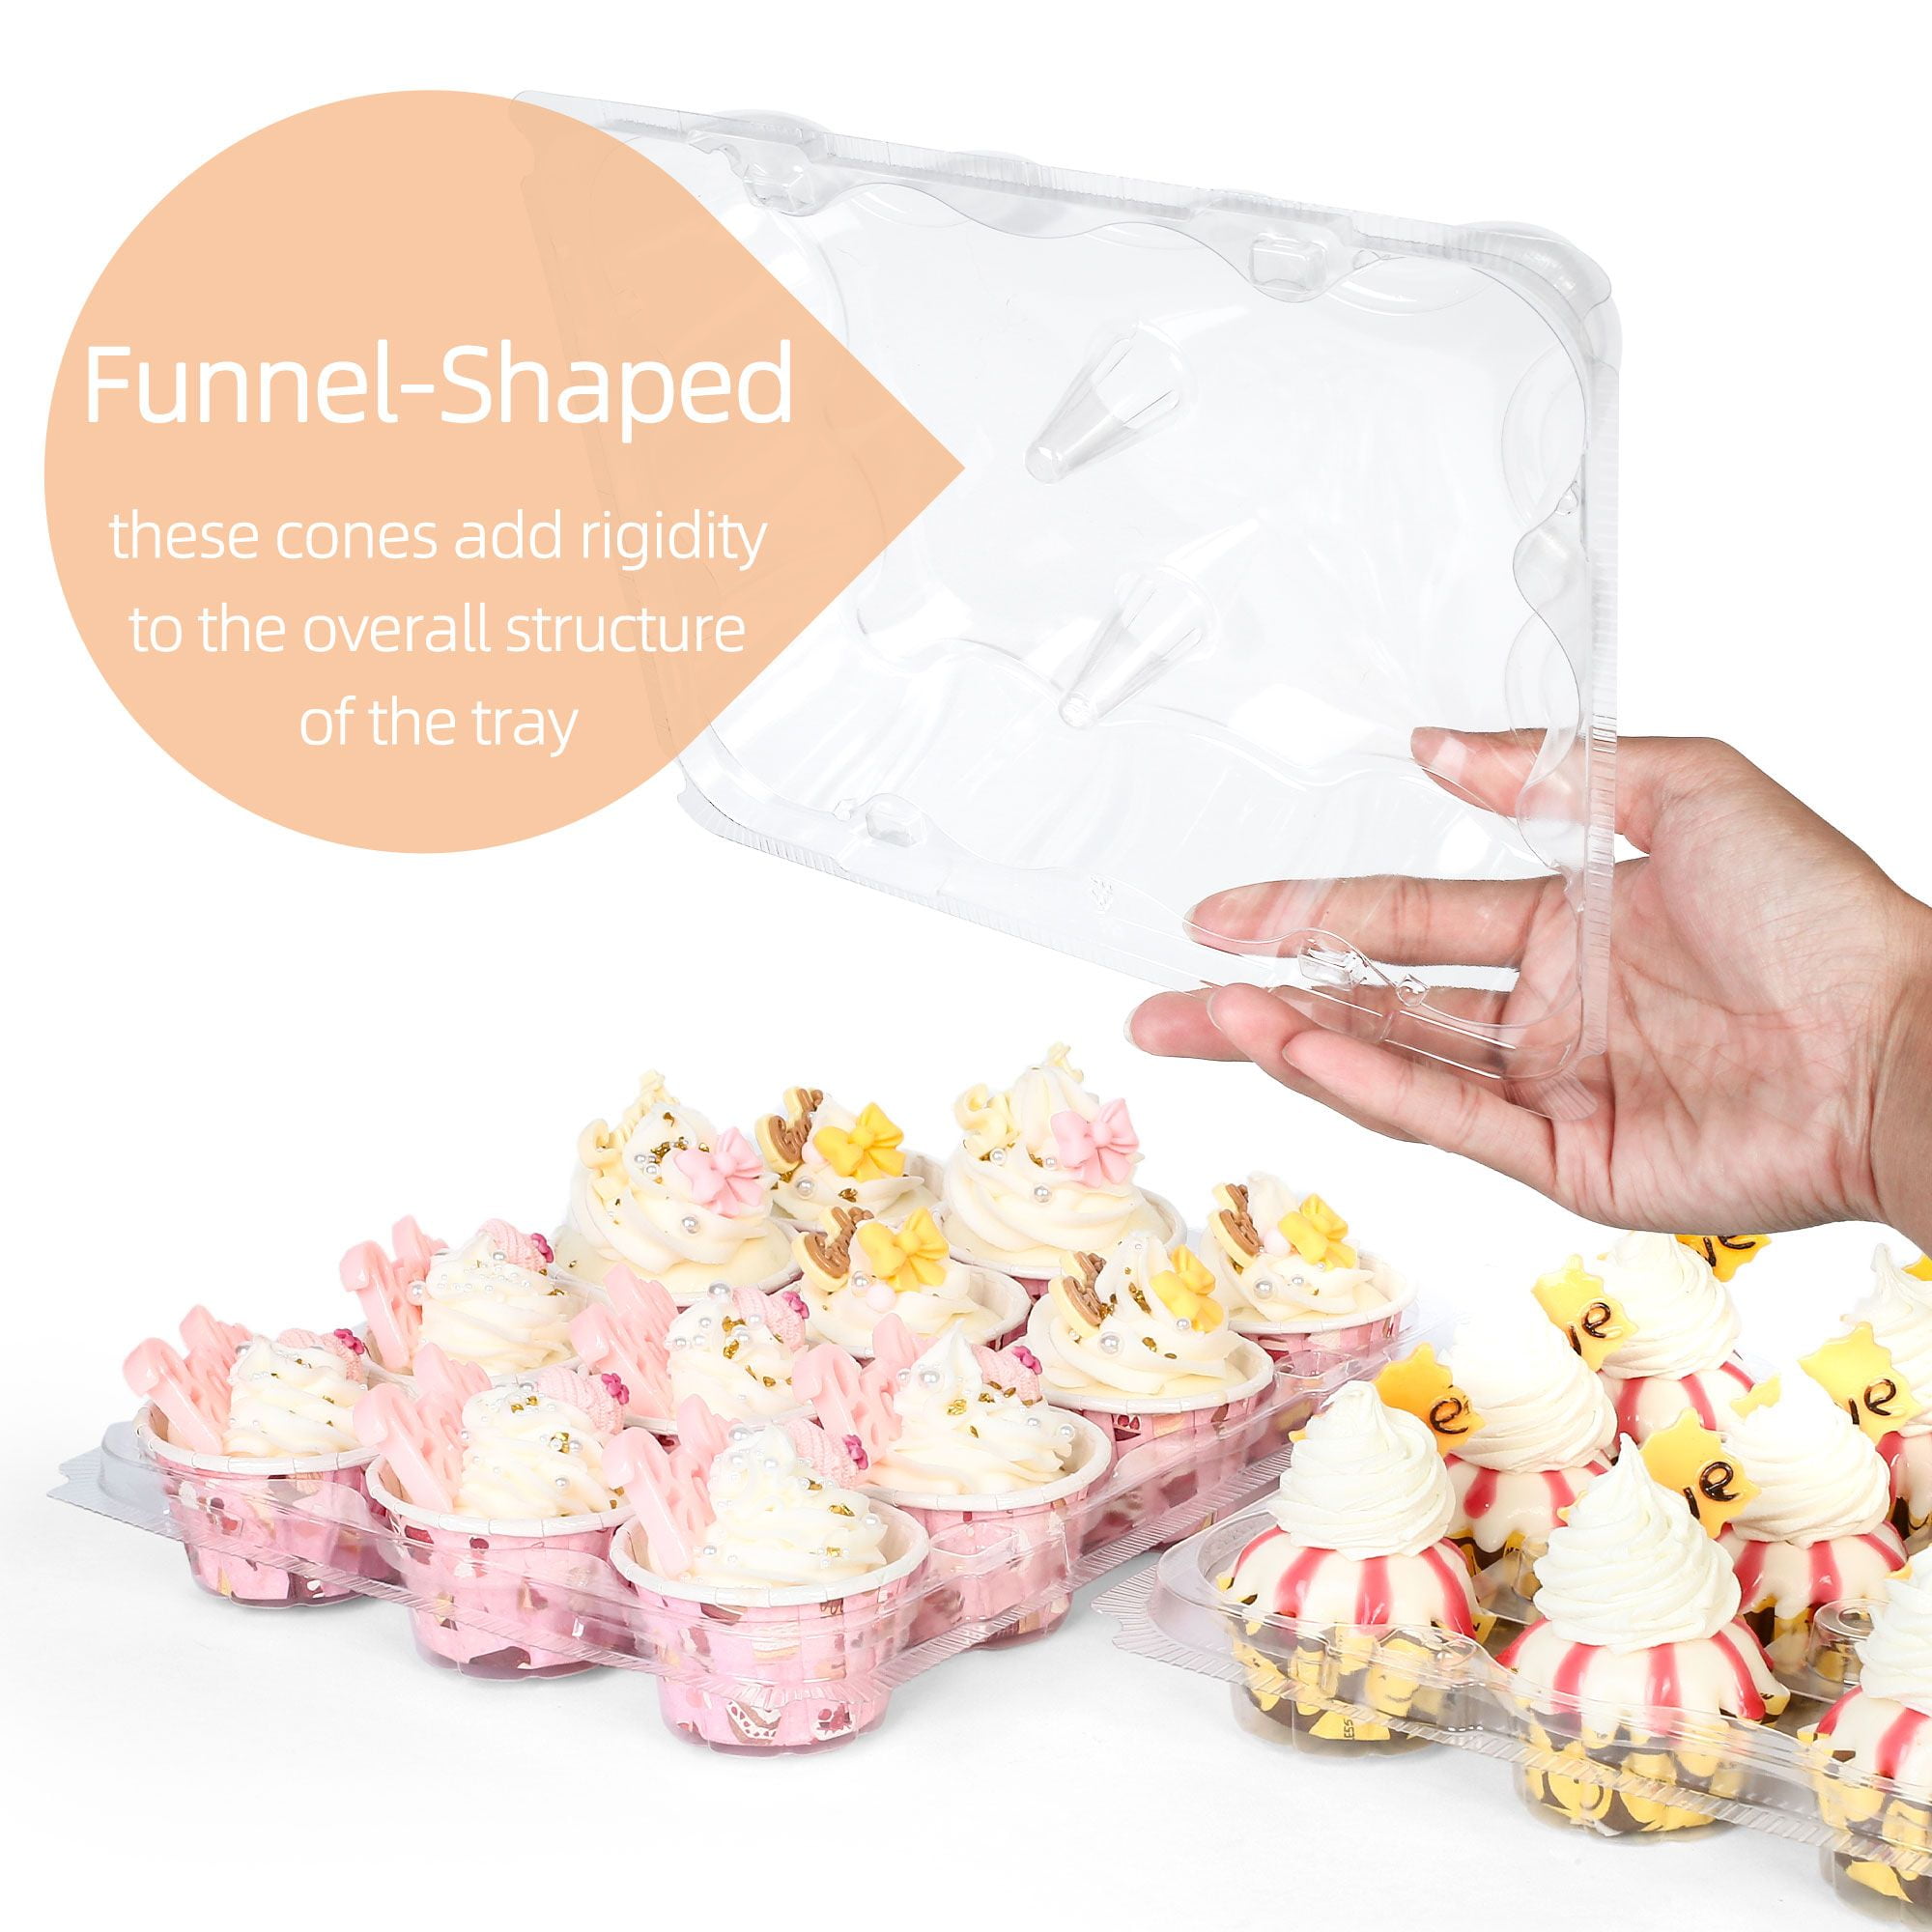 Katgely Disposable Cupcake Box Container - Holds 12 Cupcakes - PBA Free  Plastic - Pack of 10 - ASIN: B0748LJWLQ